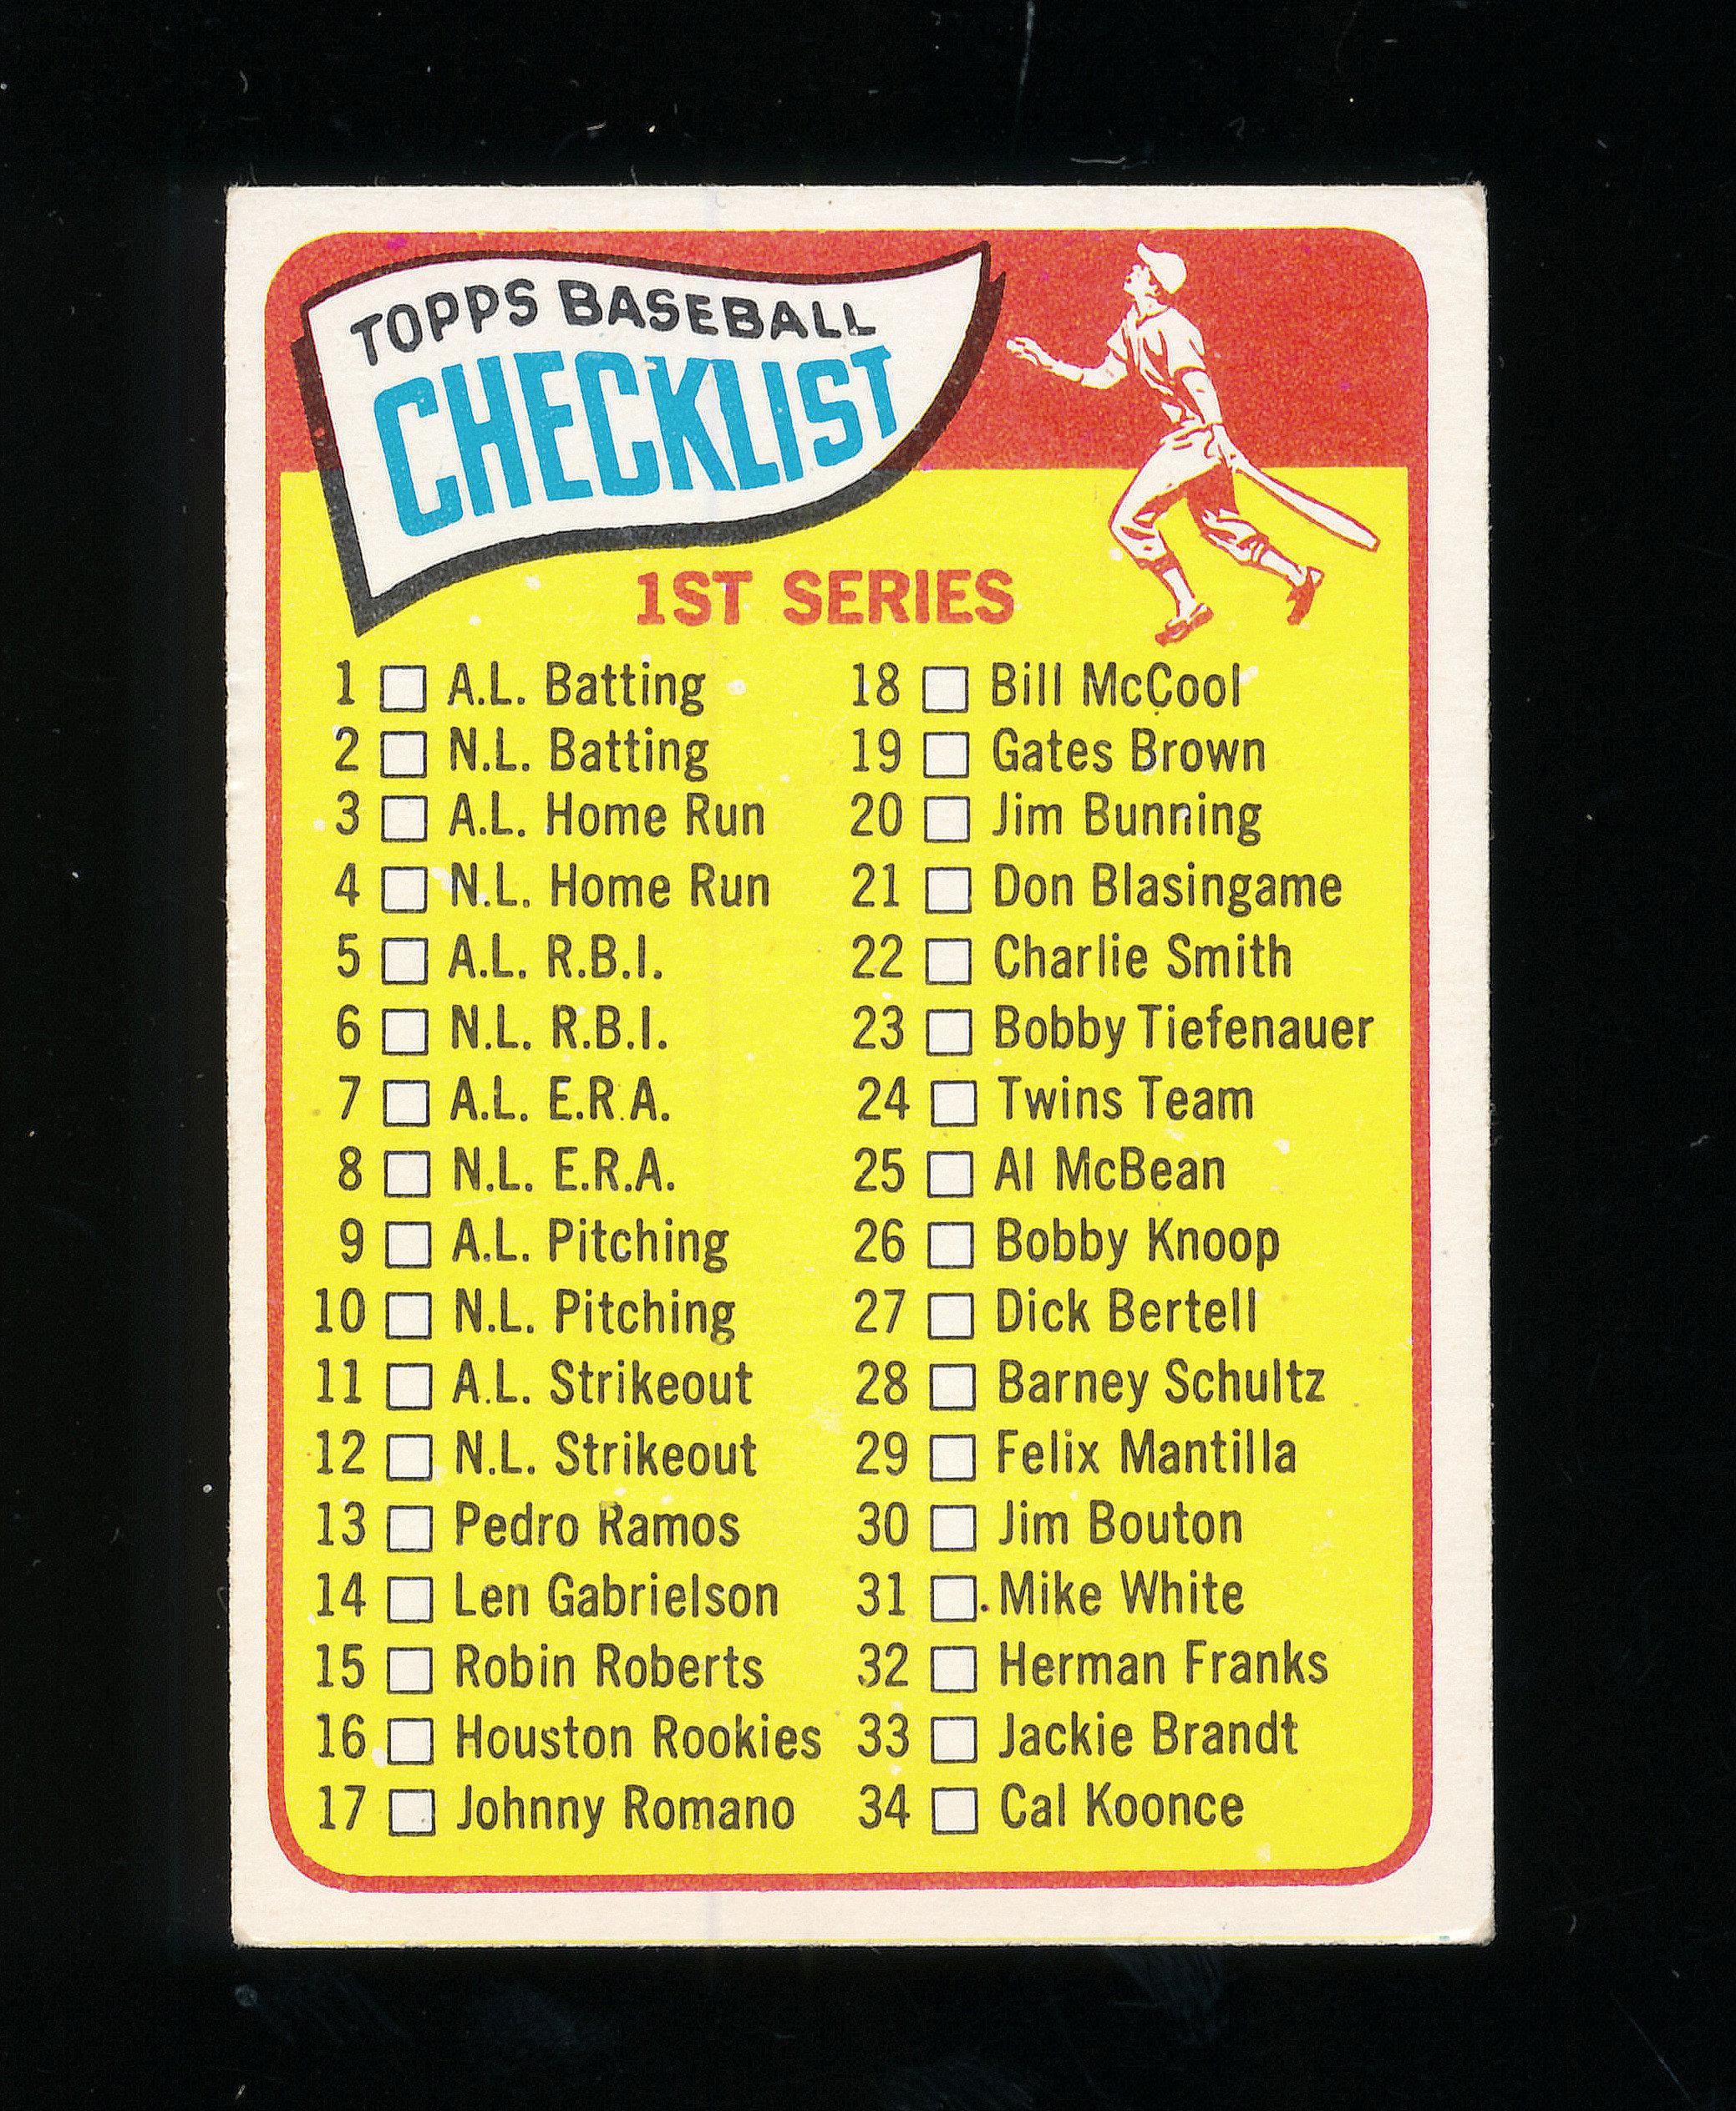 1965 Topps Baseball Card #79 CheckList 1st Series.  EX to EX-MT Condition.